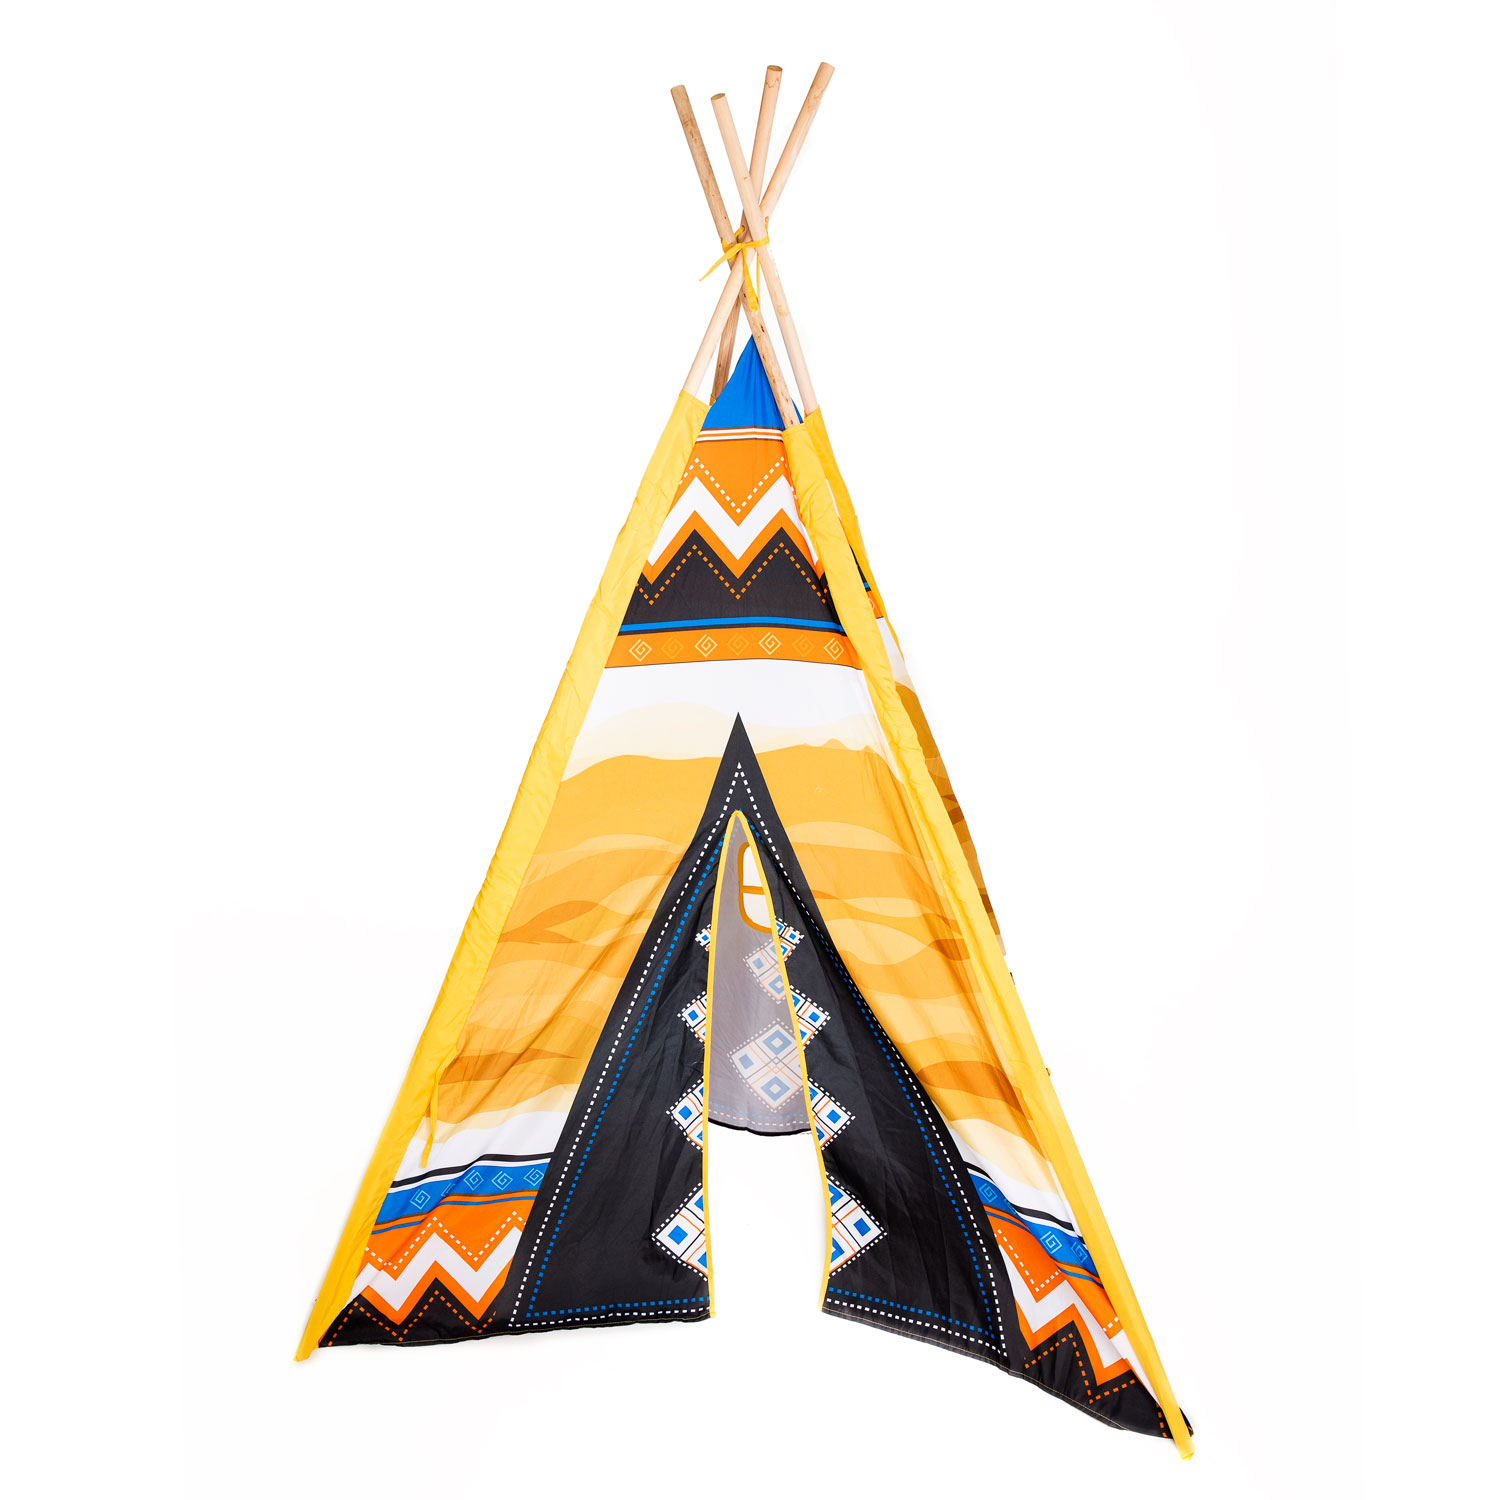 Lao Vaardig component Play tent Tipi Indian | Thimble Toys